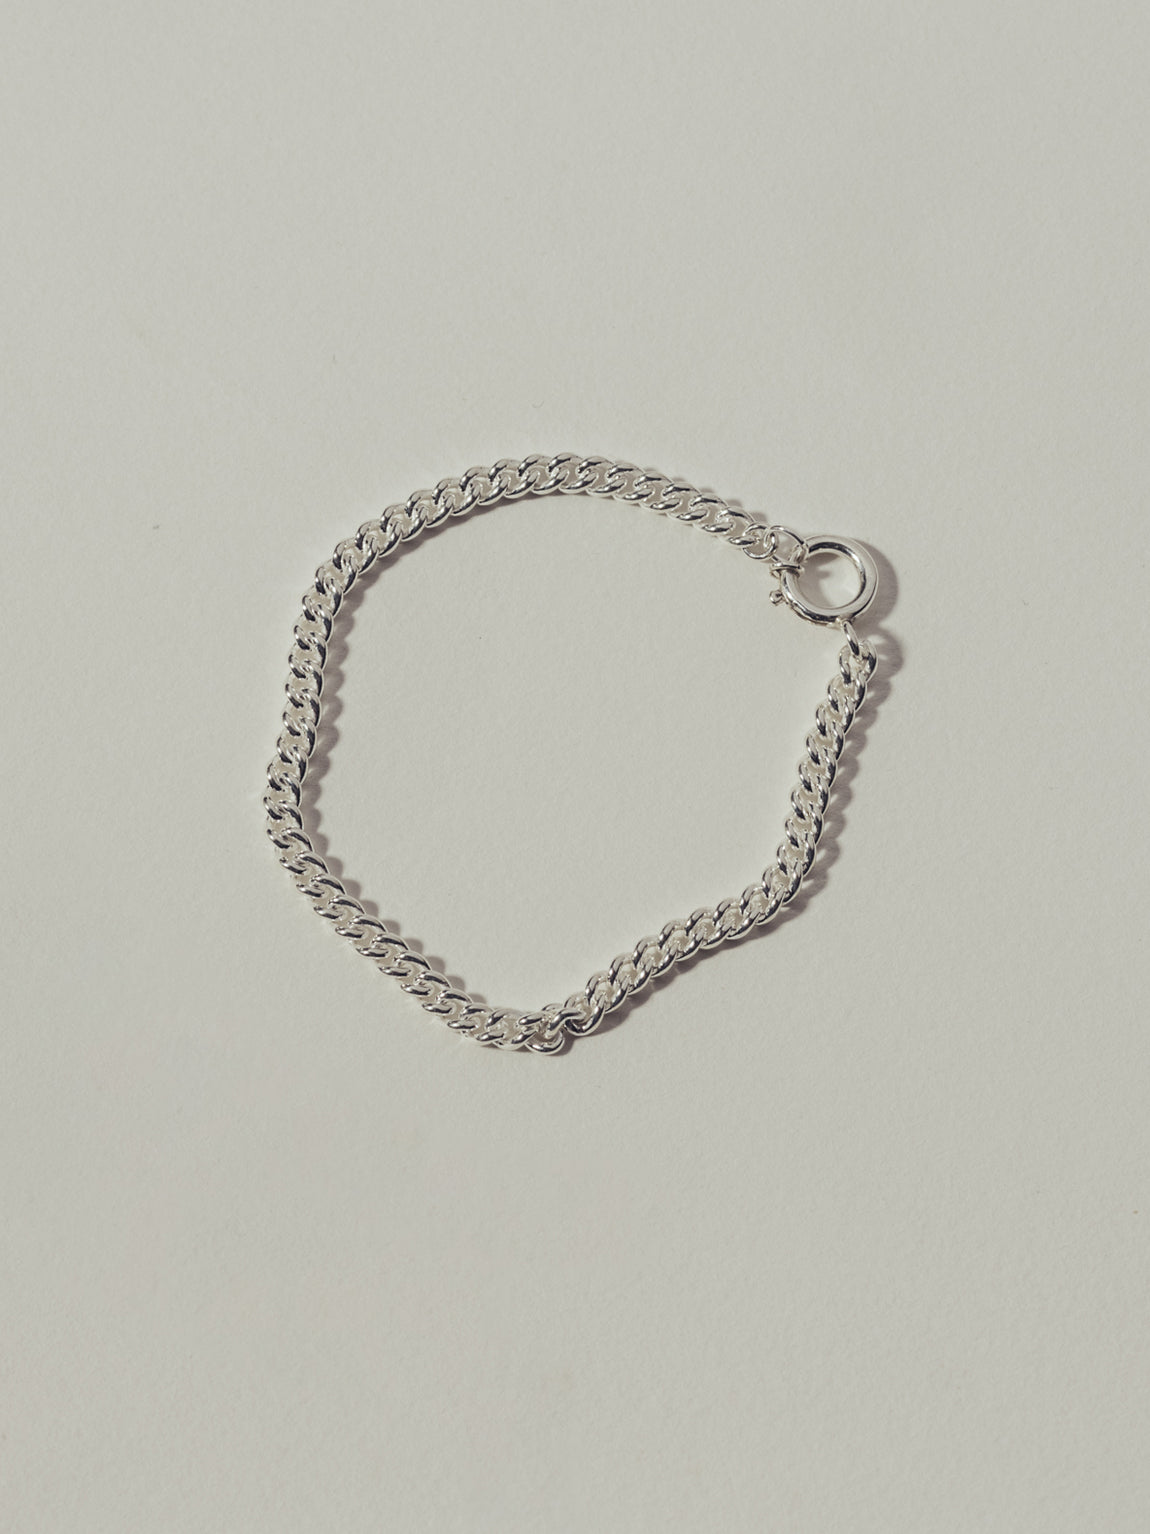 Friends forever 4.2 mm | 925 Sterling Silver